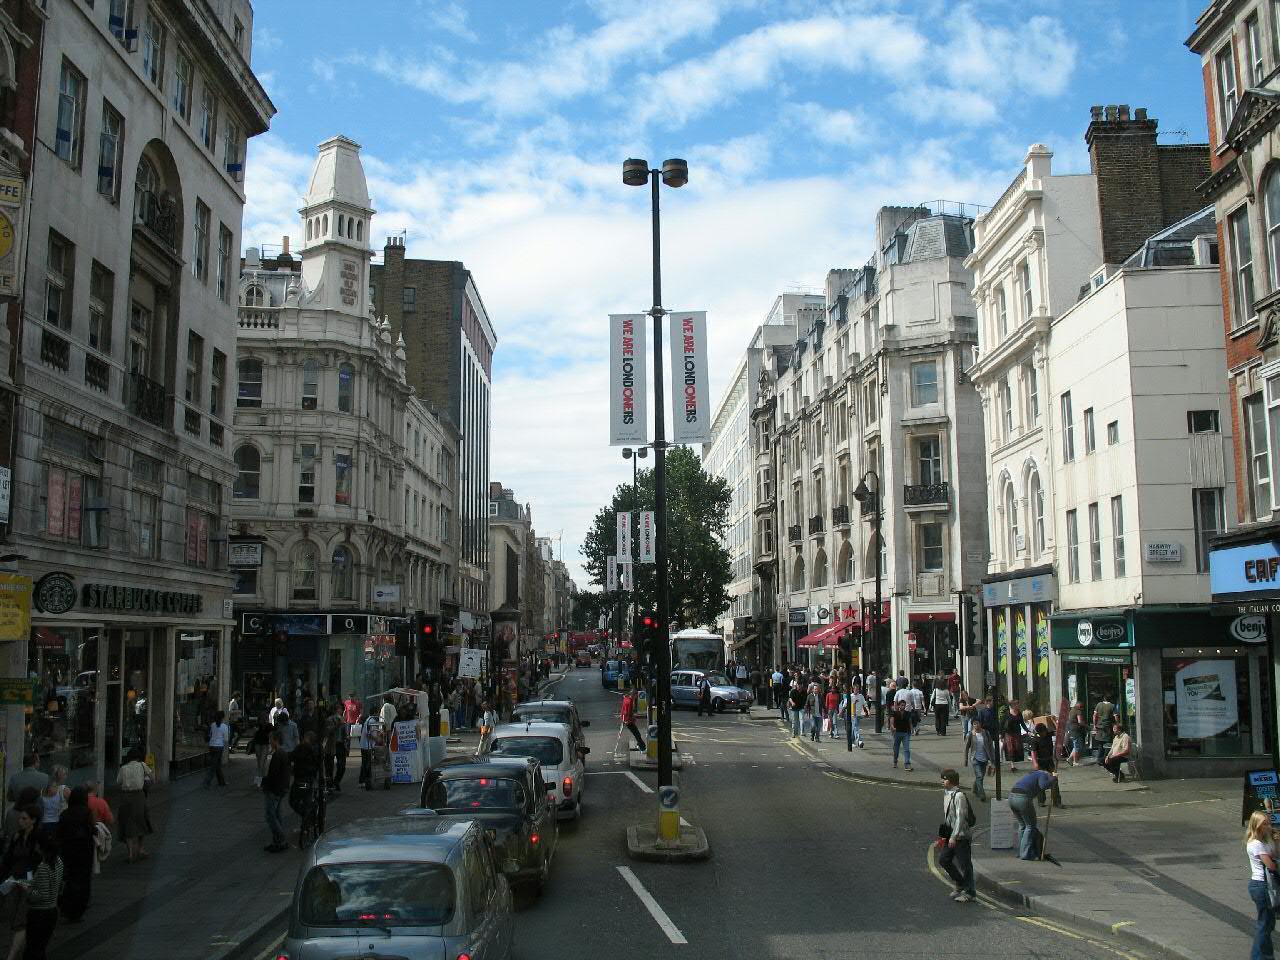 London's Oxford Street is usually full equal parts people and vehicles.